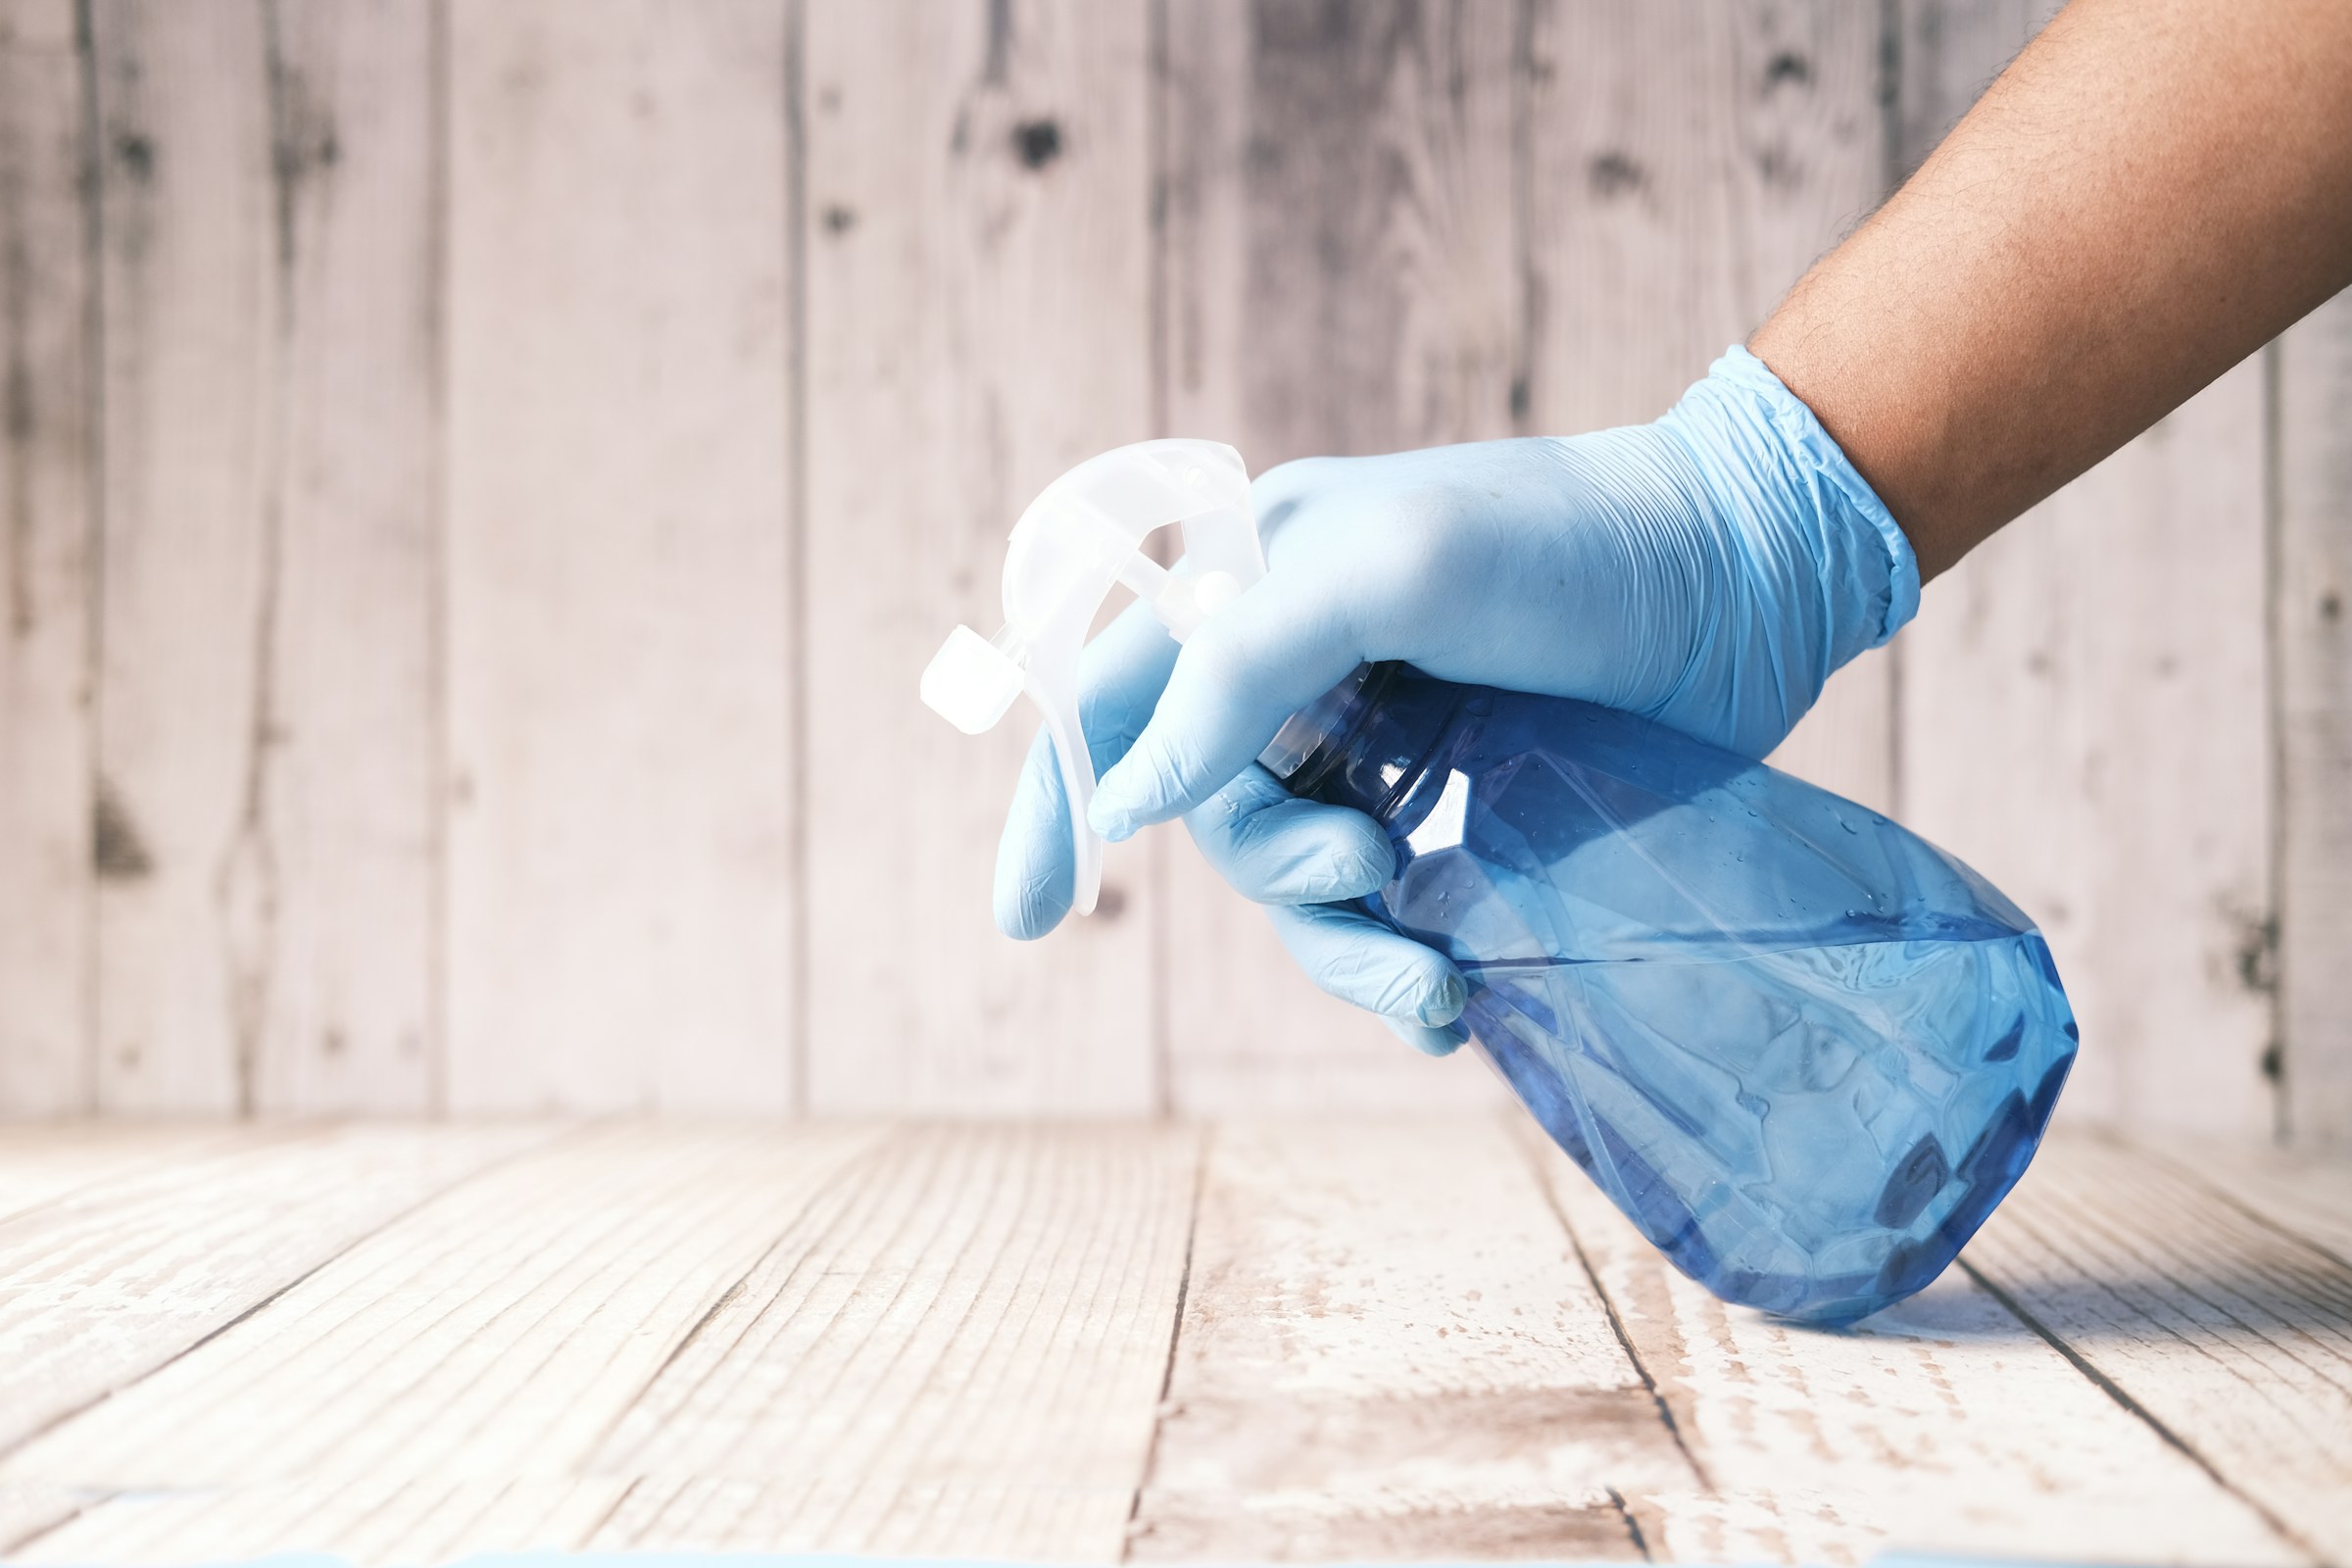 A person cleaning | Source: Unsplash